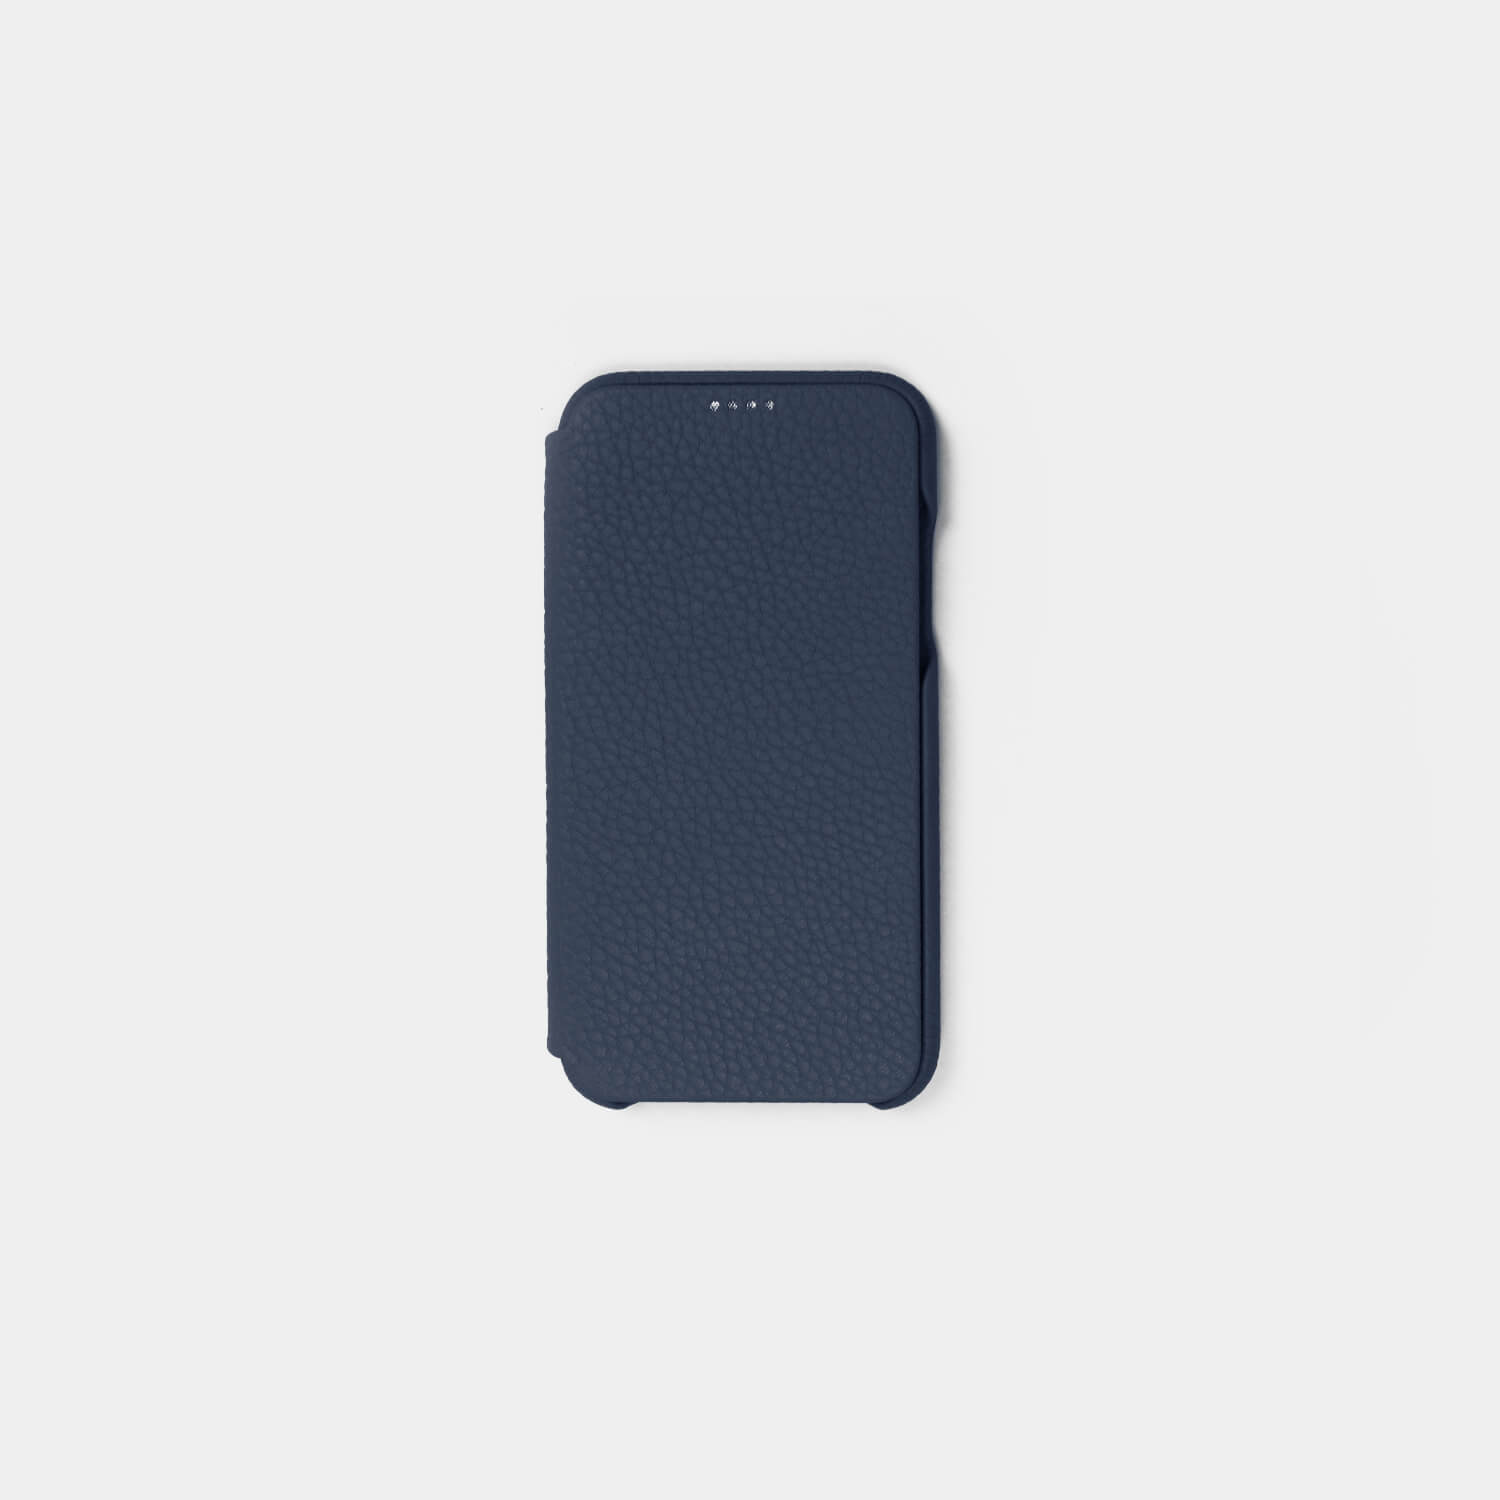 Pebble grain leather phone flip over screen cover and case to protect the phone for all models